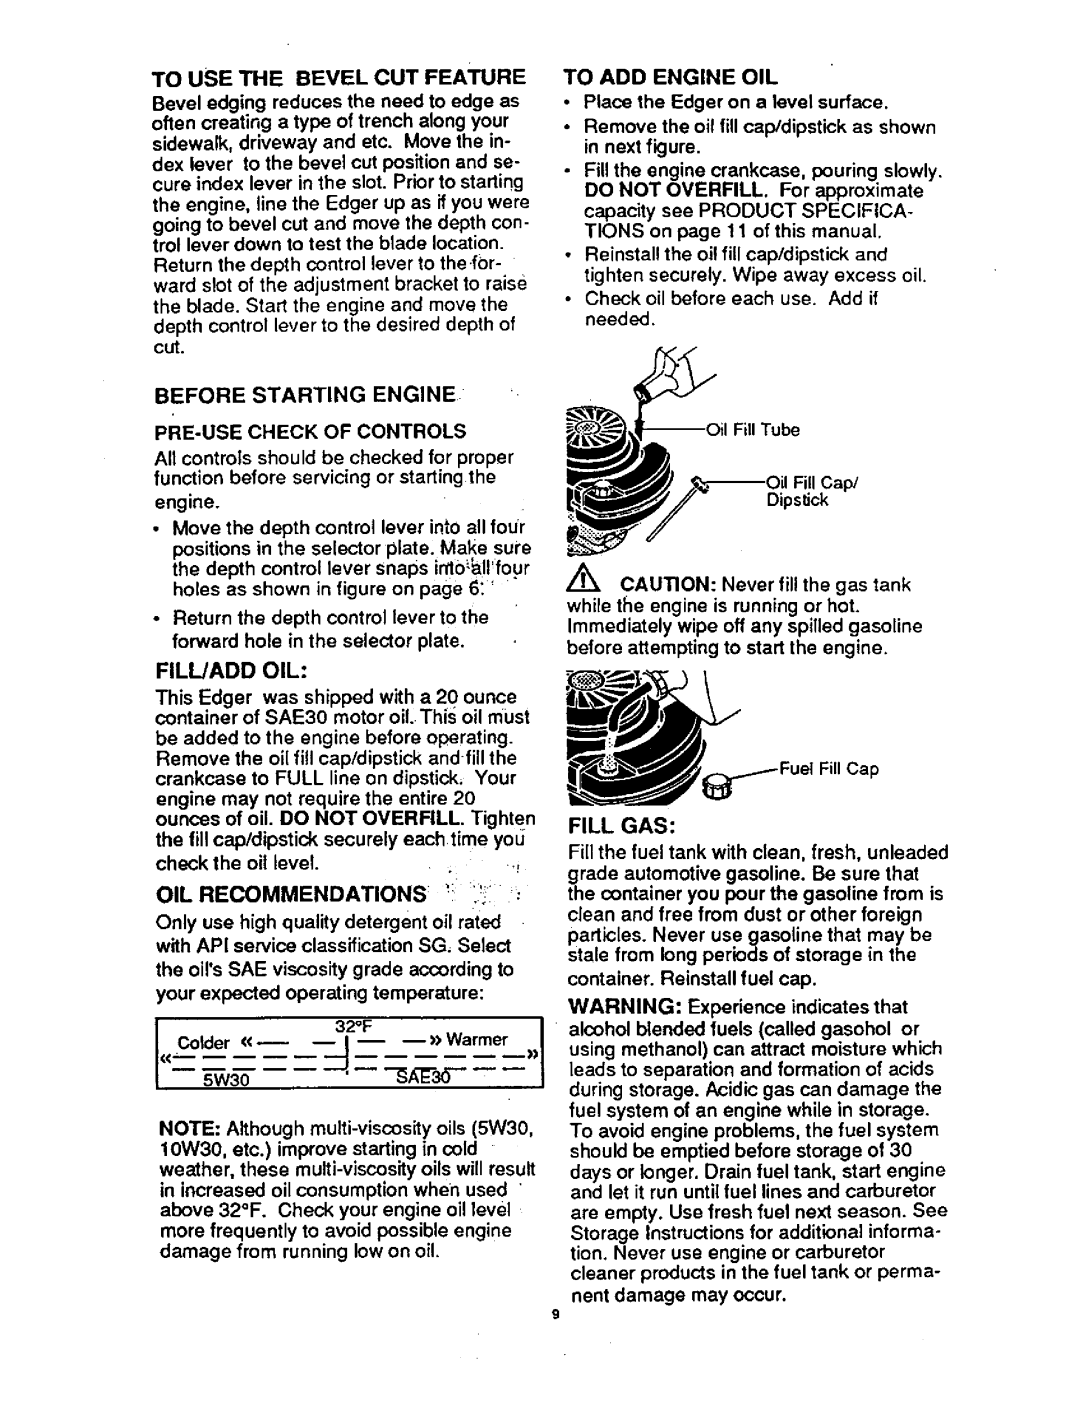 Craftsman 536.7974 operating instructions To Add Engine Oil, Fill/Add Oil, Oil Recommendations 